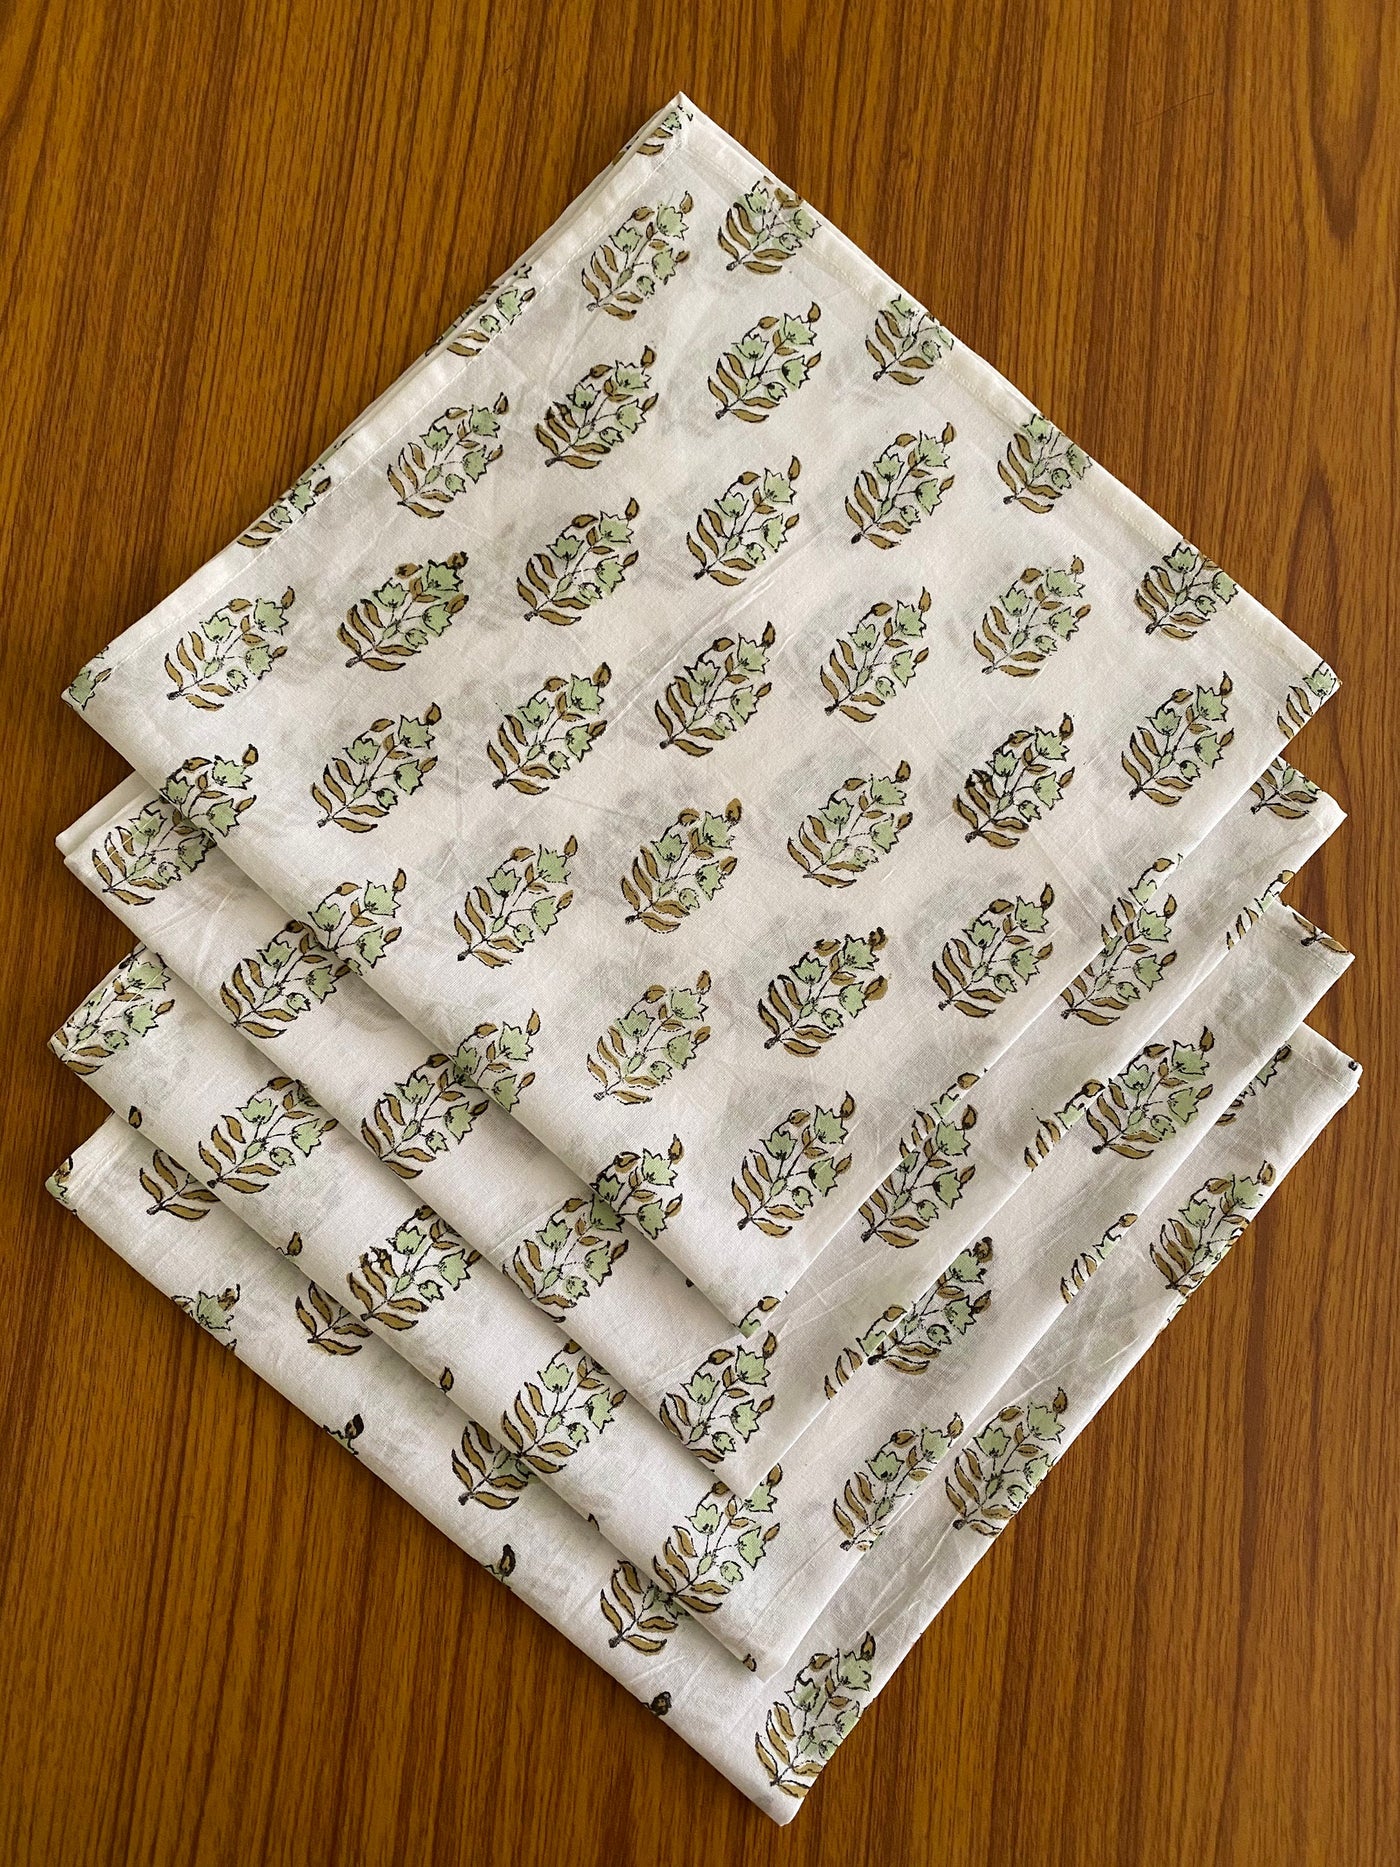 Mint, Olive Green on White Indian Hand Block Floral Printed 100% Pure Cotton Cloth Napkins, 18x18"- Cocktail Napkins, 20x20"- Dinner Napkins